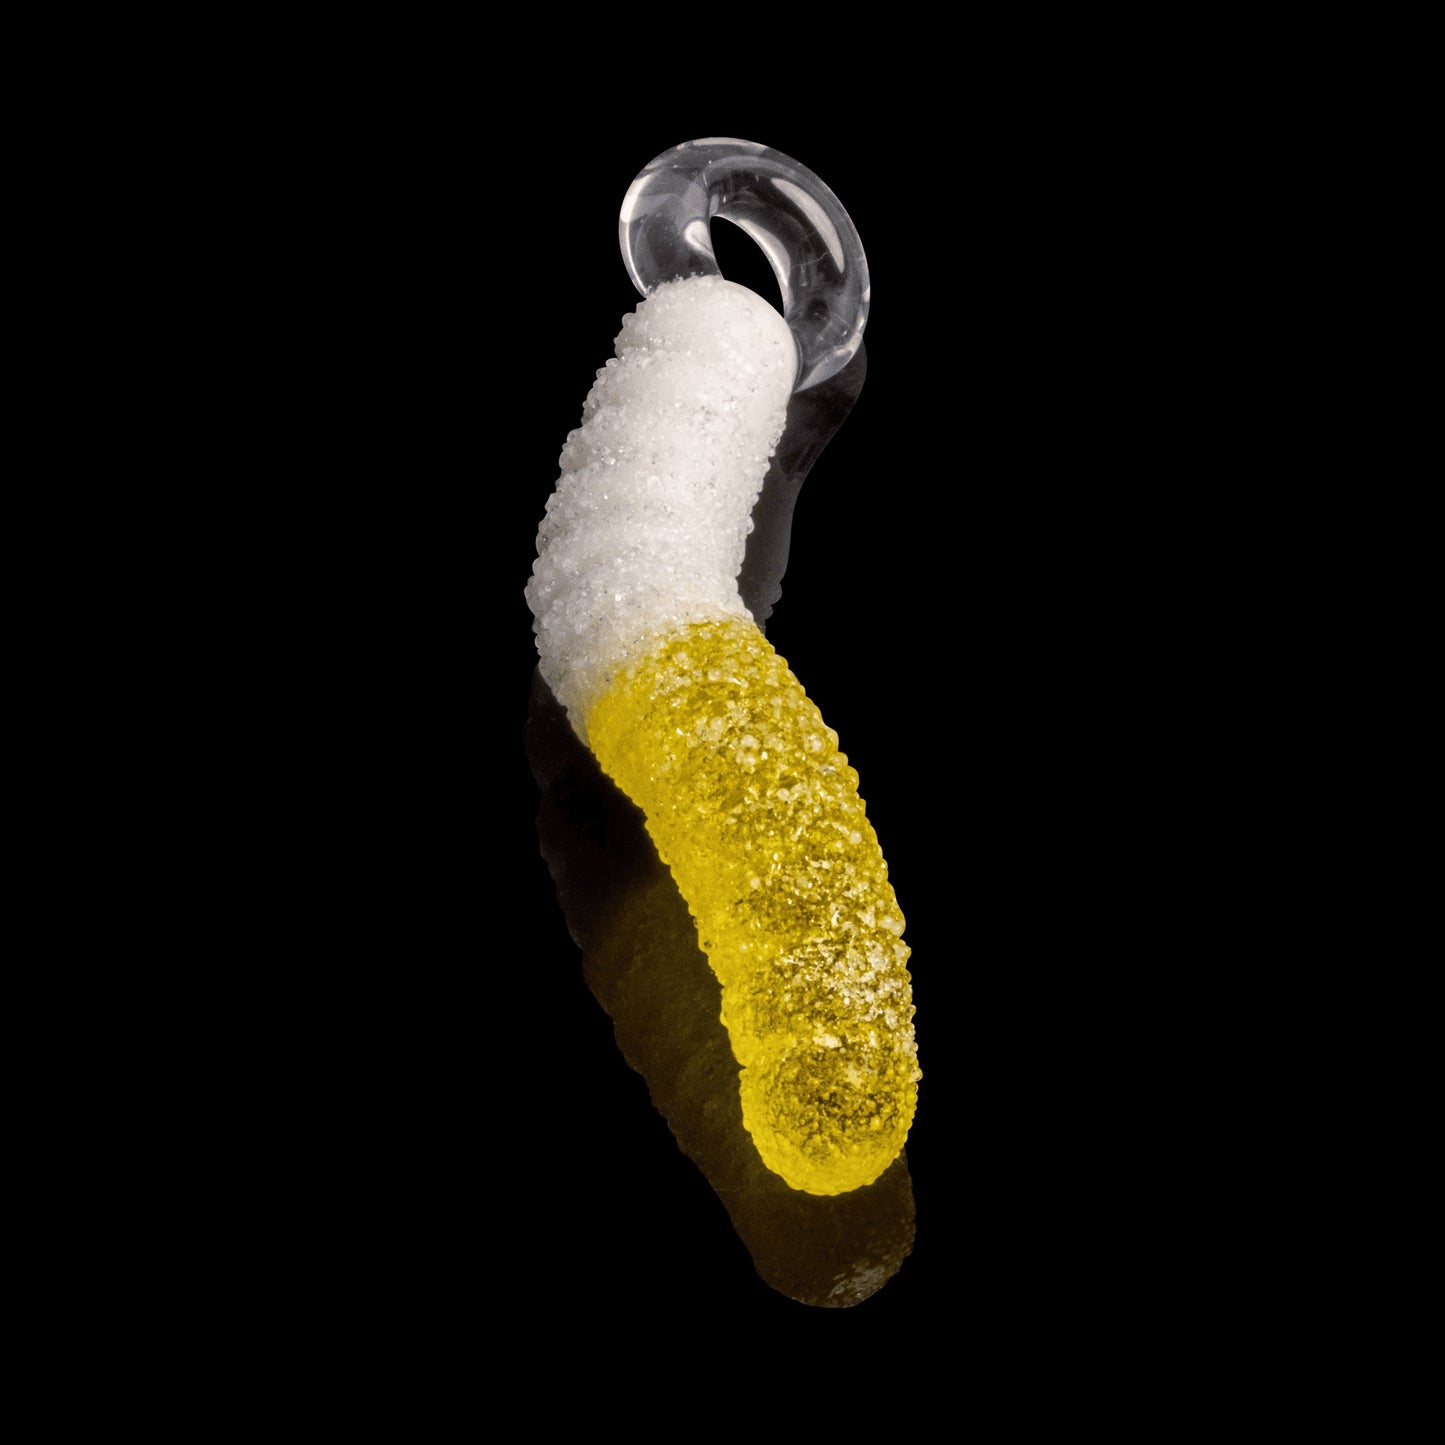 sophisticated glass pendant - Gummy Worm Pendant (A) by Emperial Glass (GV 2022)